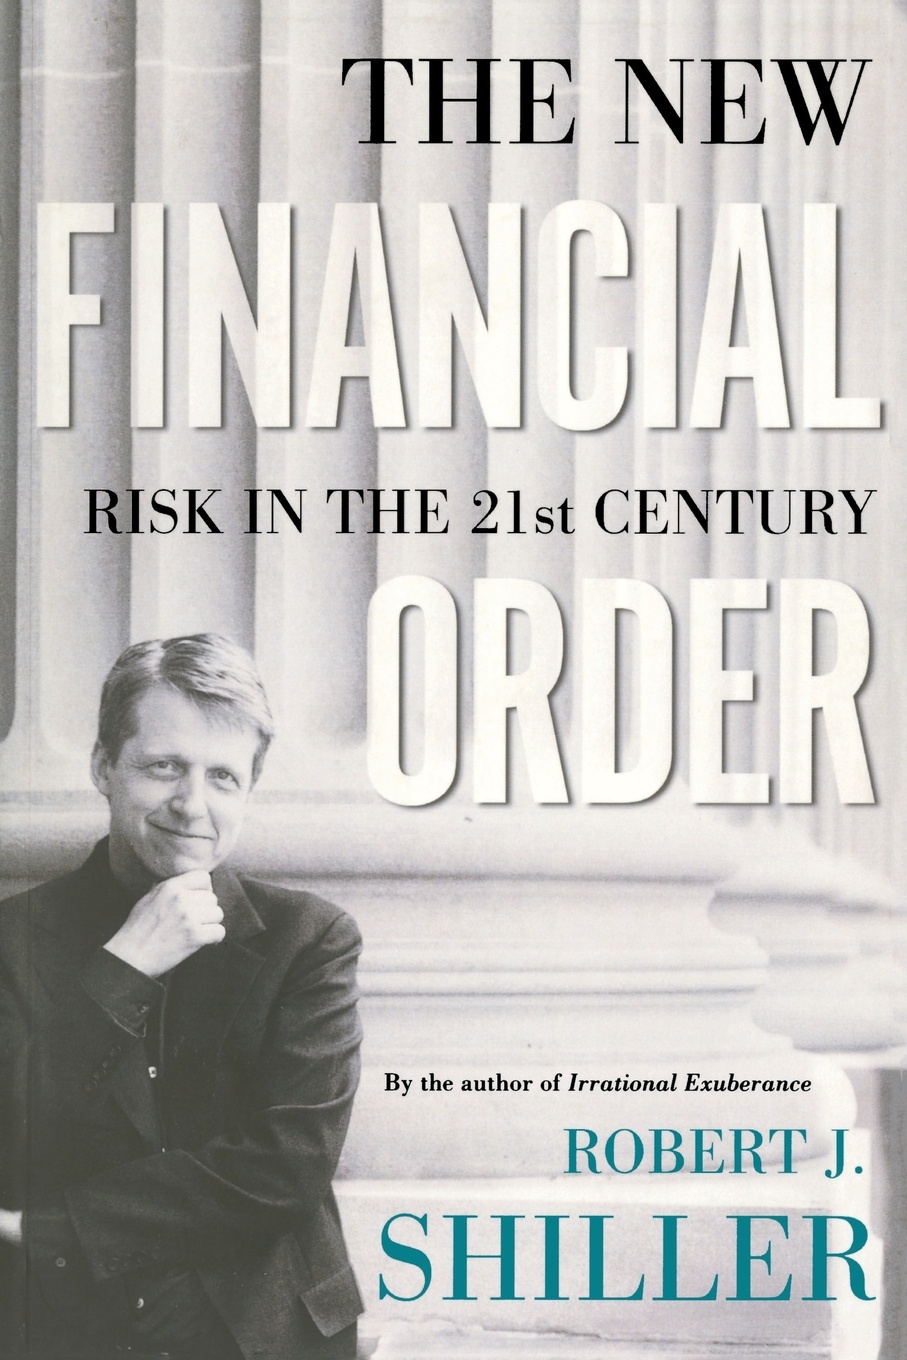 The New Financial Order. Risk in the 21st Century